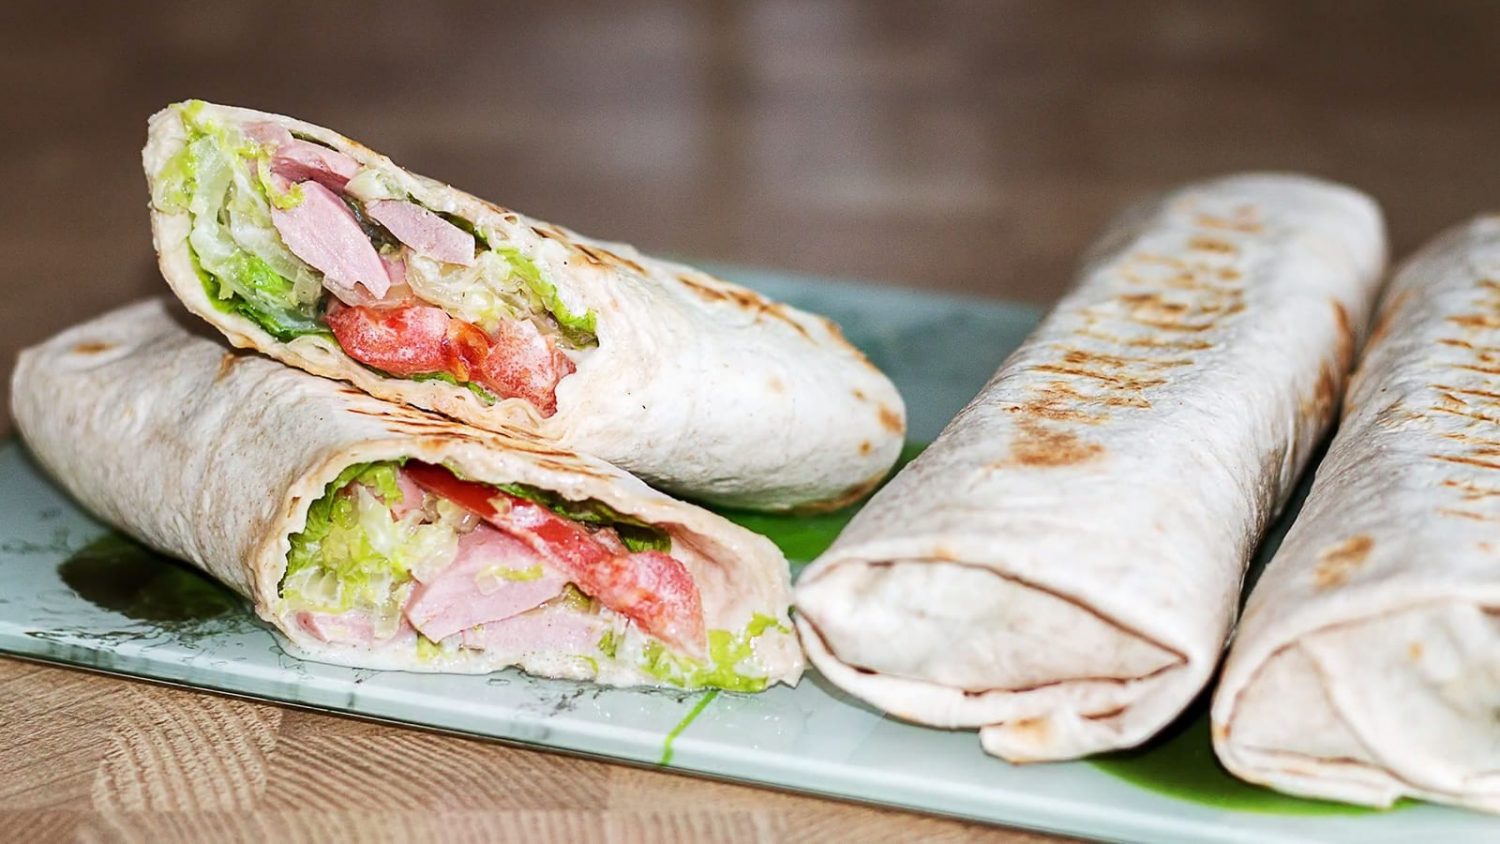 Authentic Home-Style Shawarma - A Delightful Treat